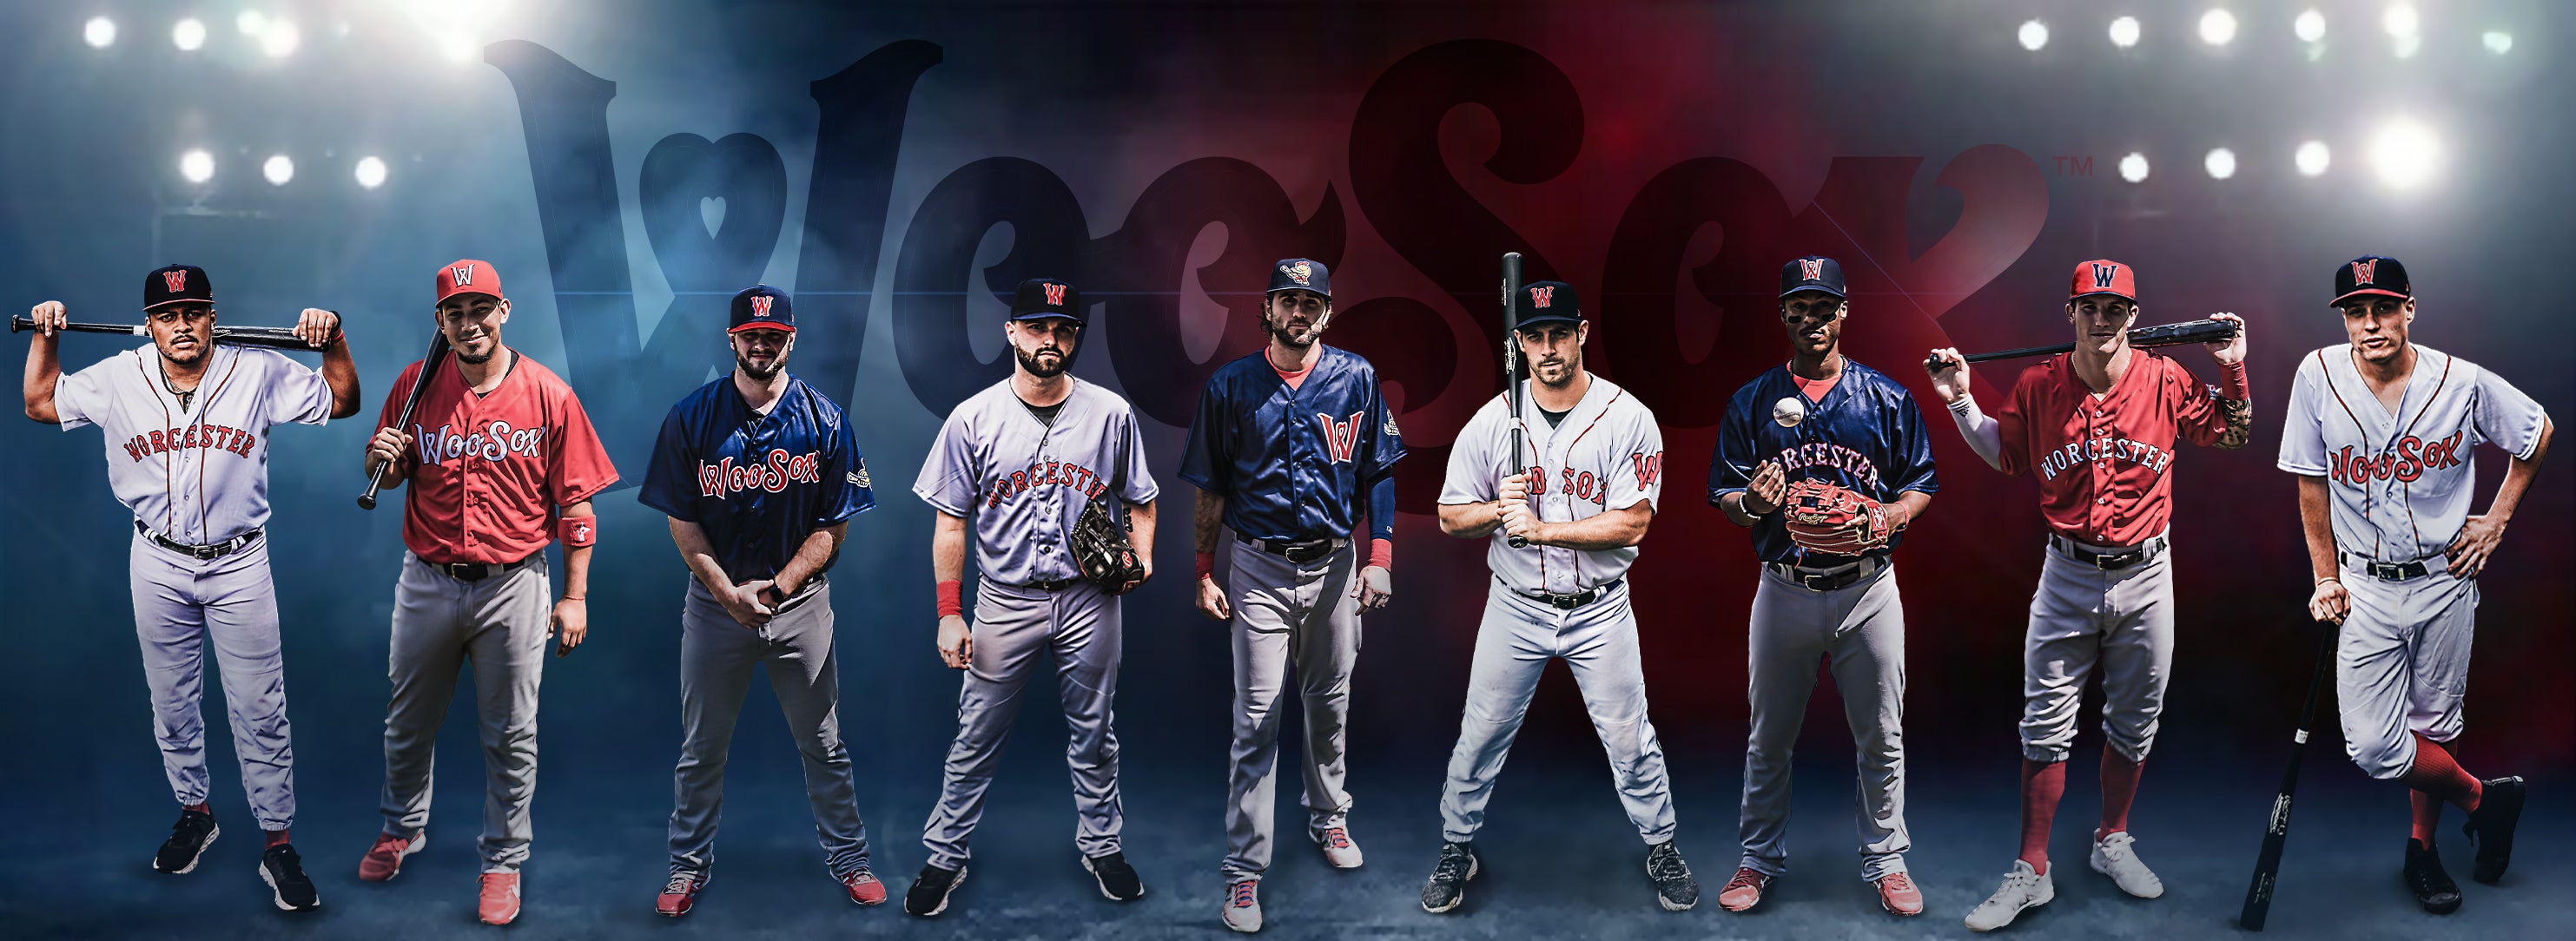 WooSox reveal 2021 player jerseys and caps